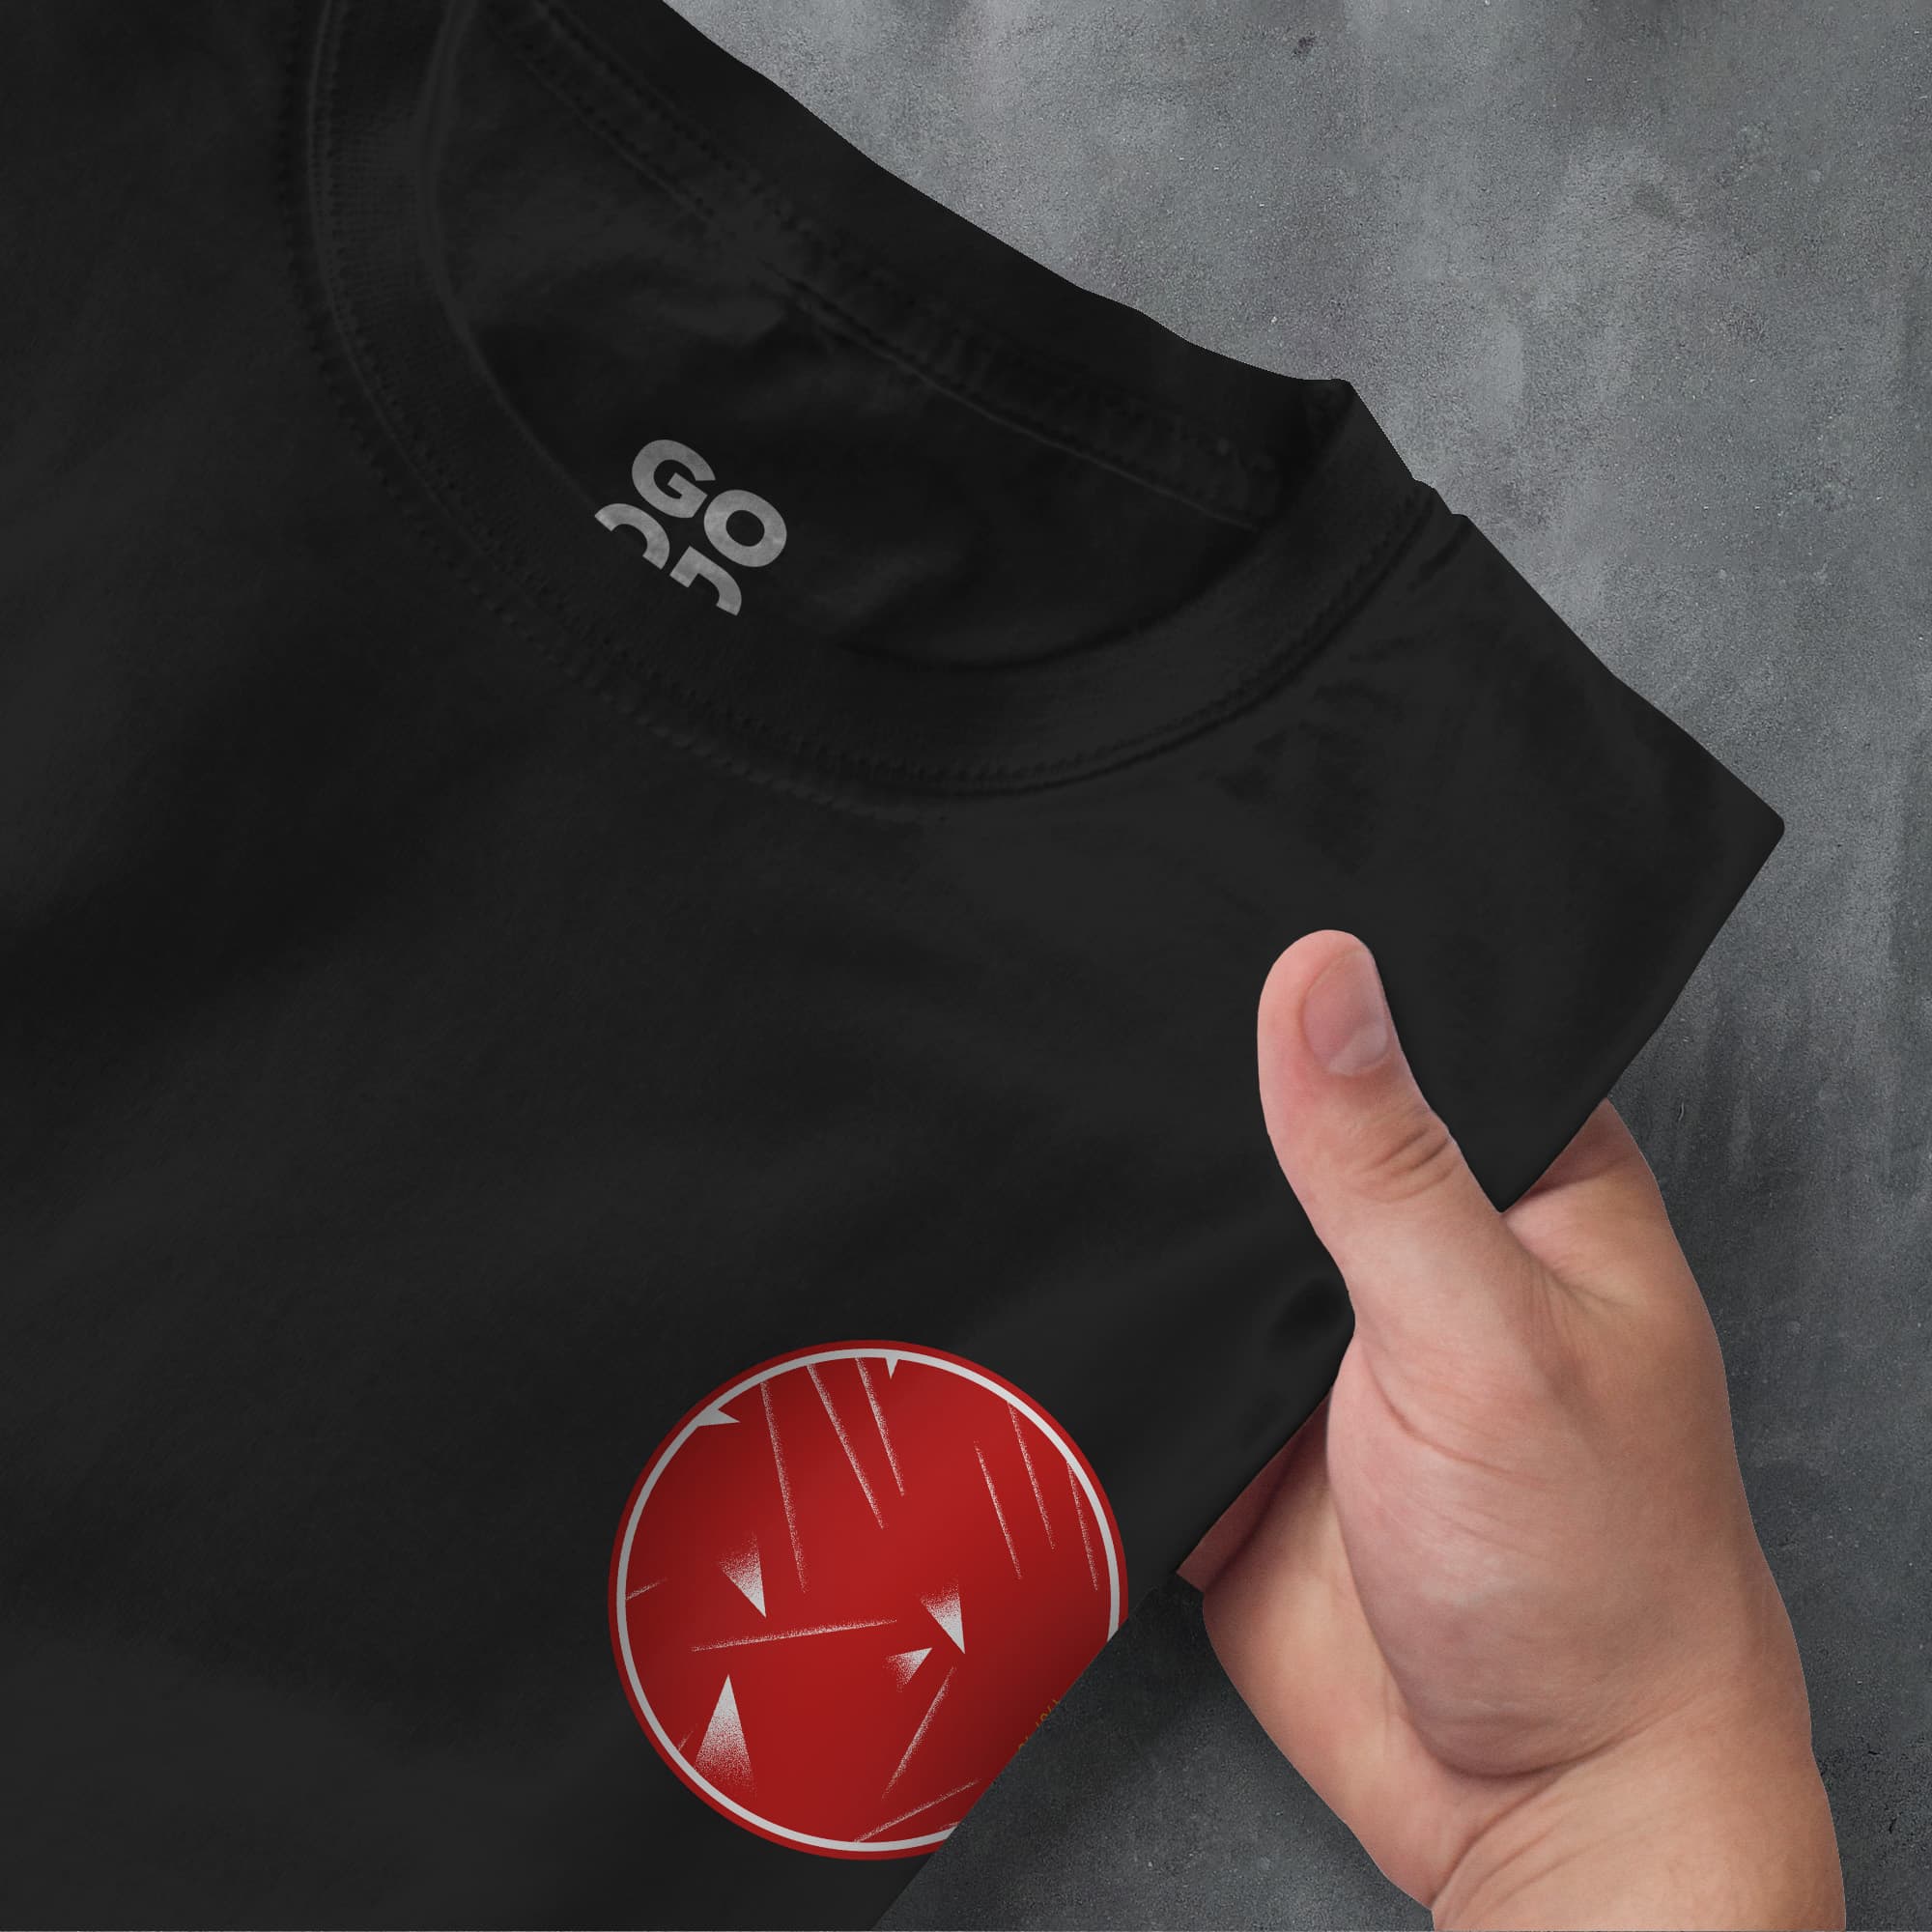 a person pointing at a red button on a black shirt